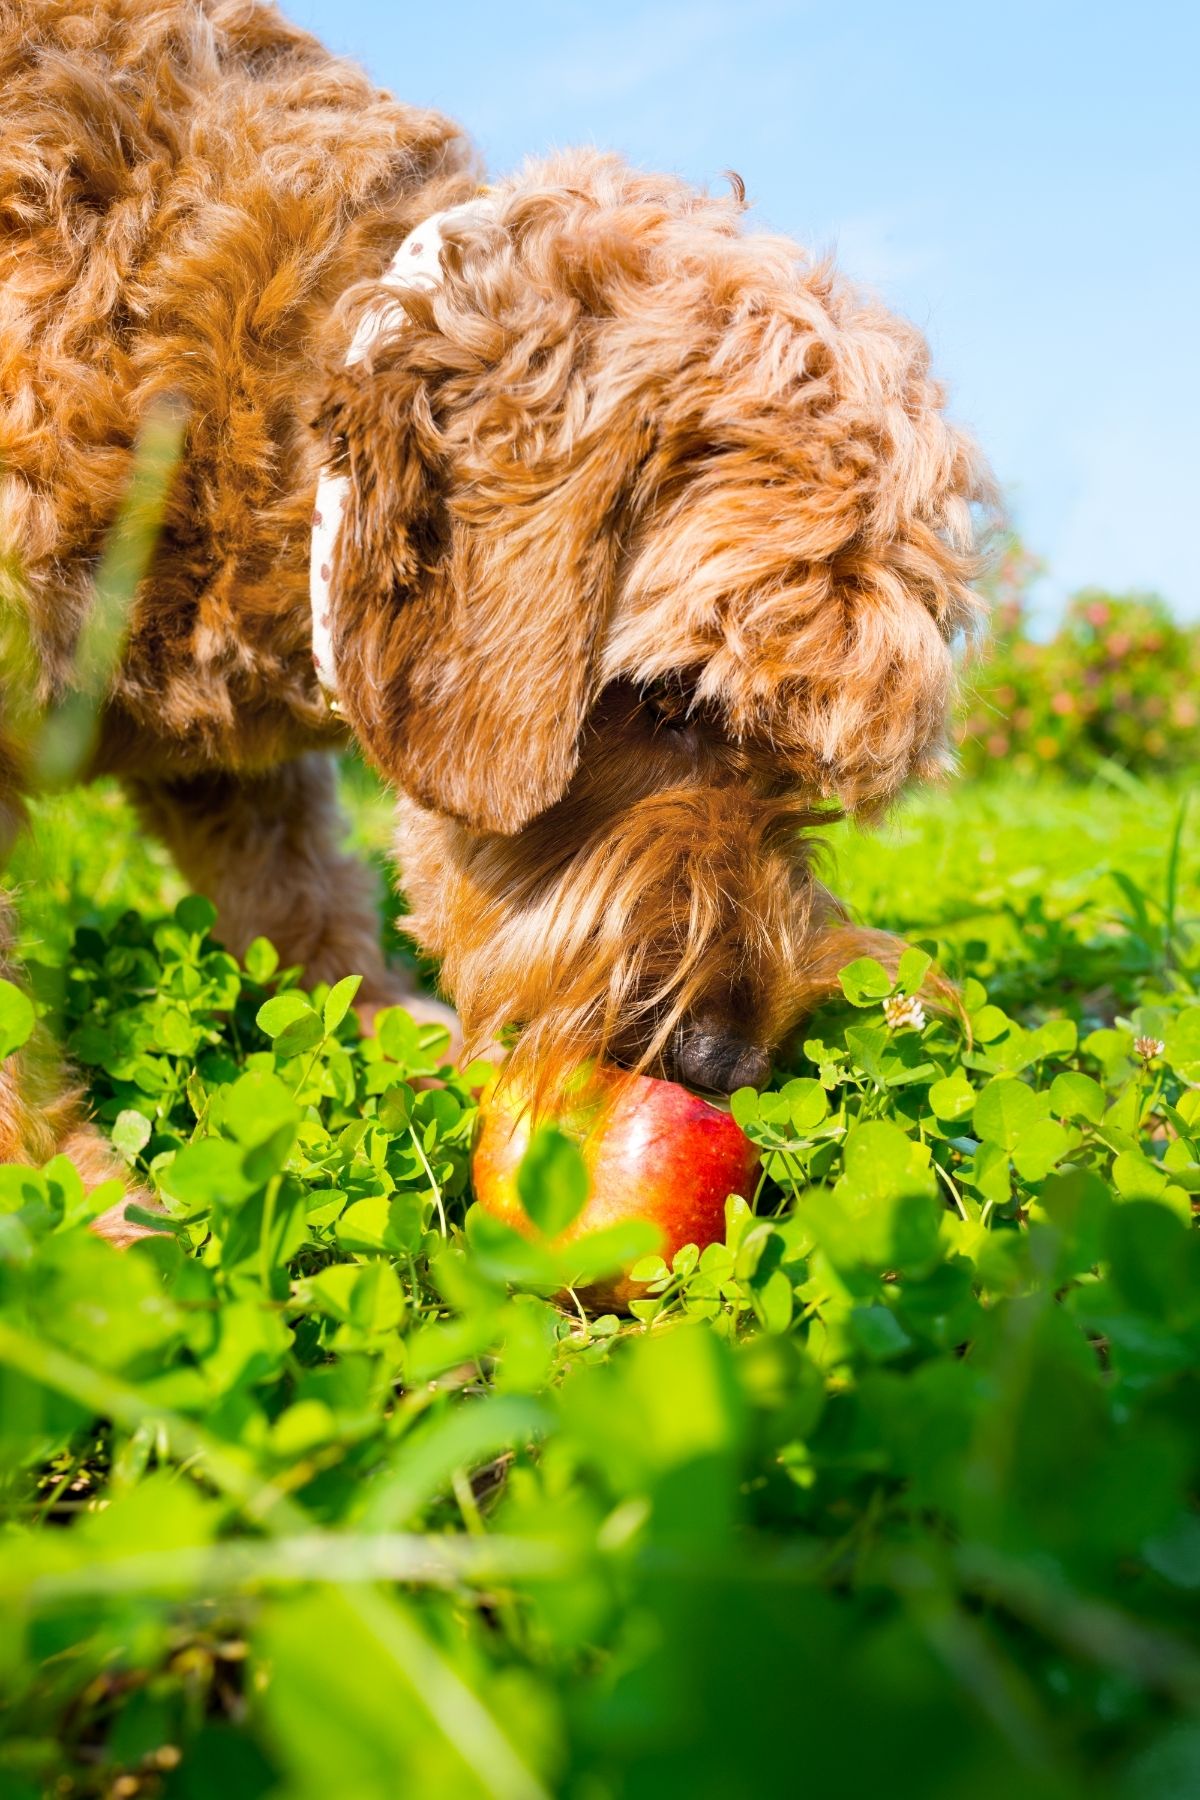 Goldendoodle Eating an Apple